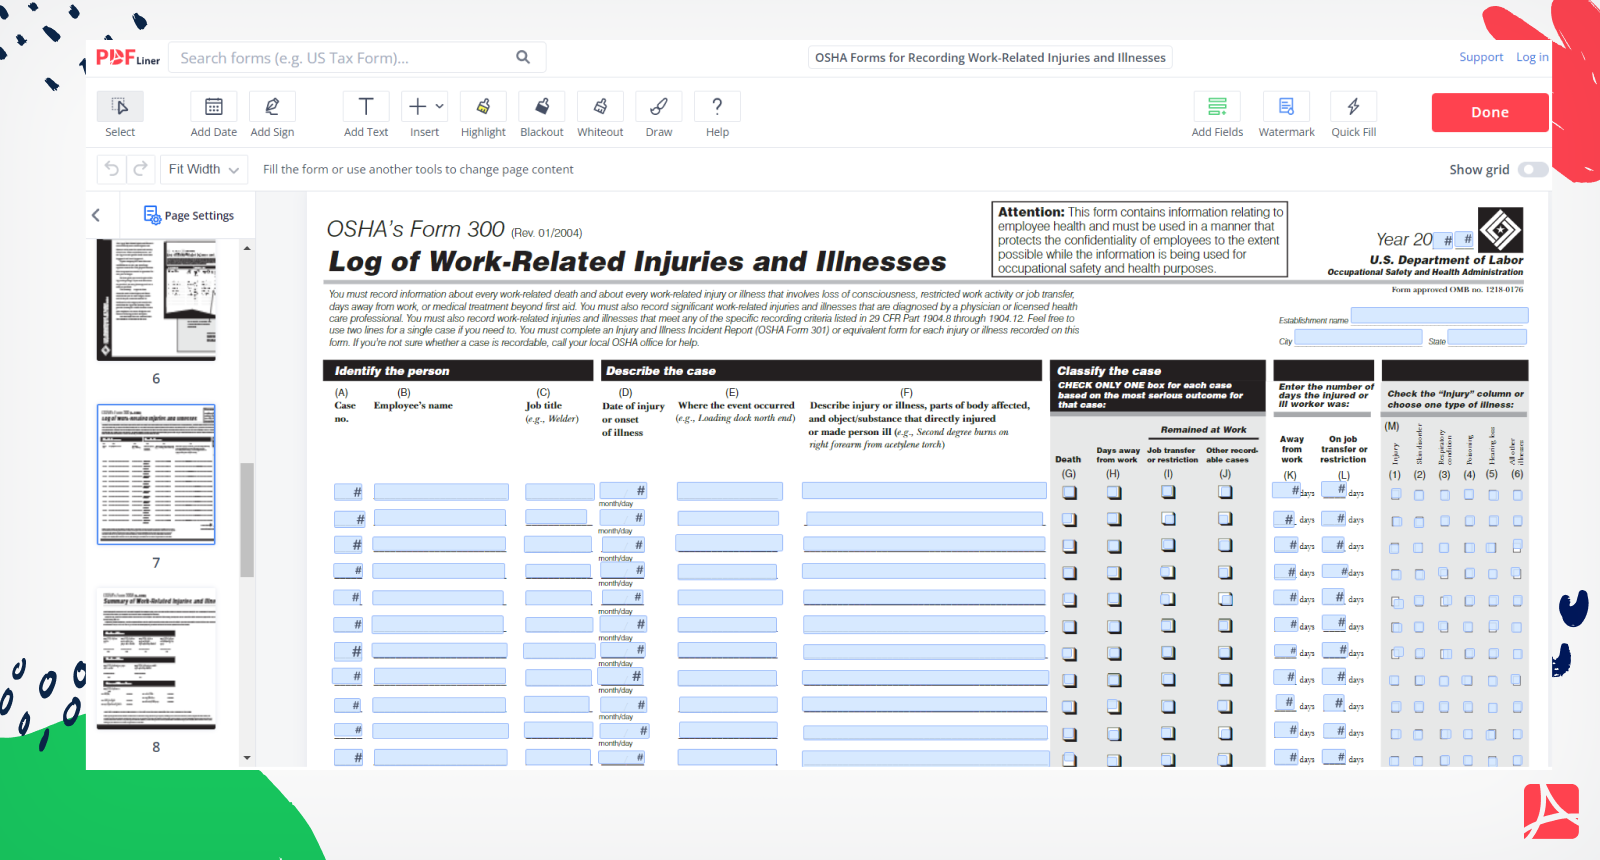 OSHA Forms for Recording Work-Related Injuries and Illnesses Form Screenshot